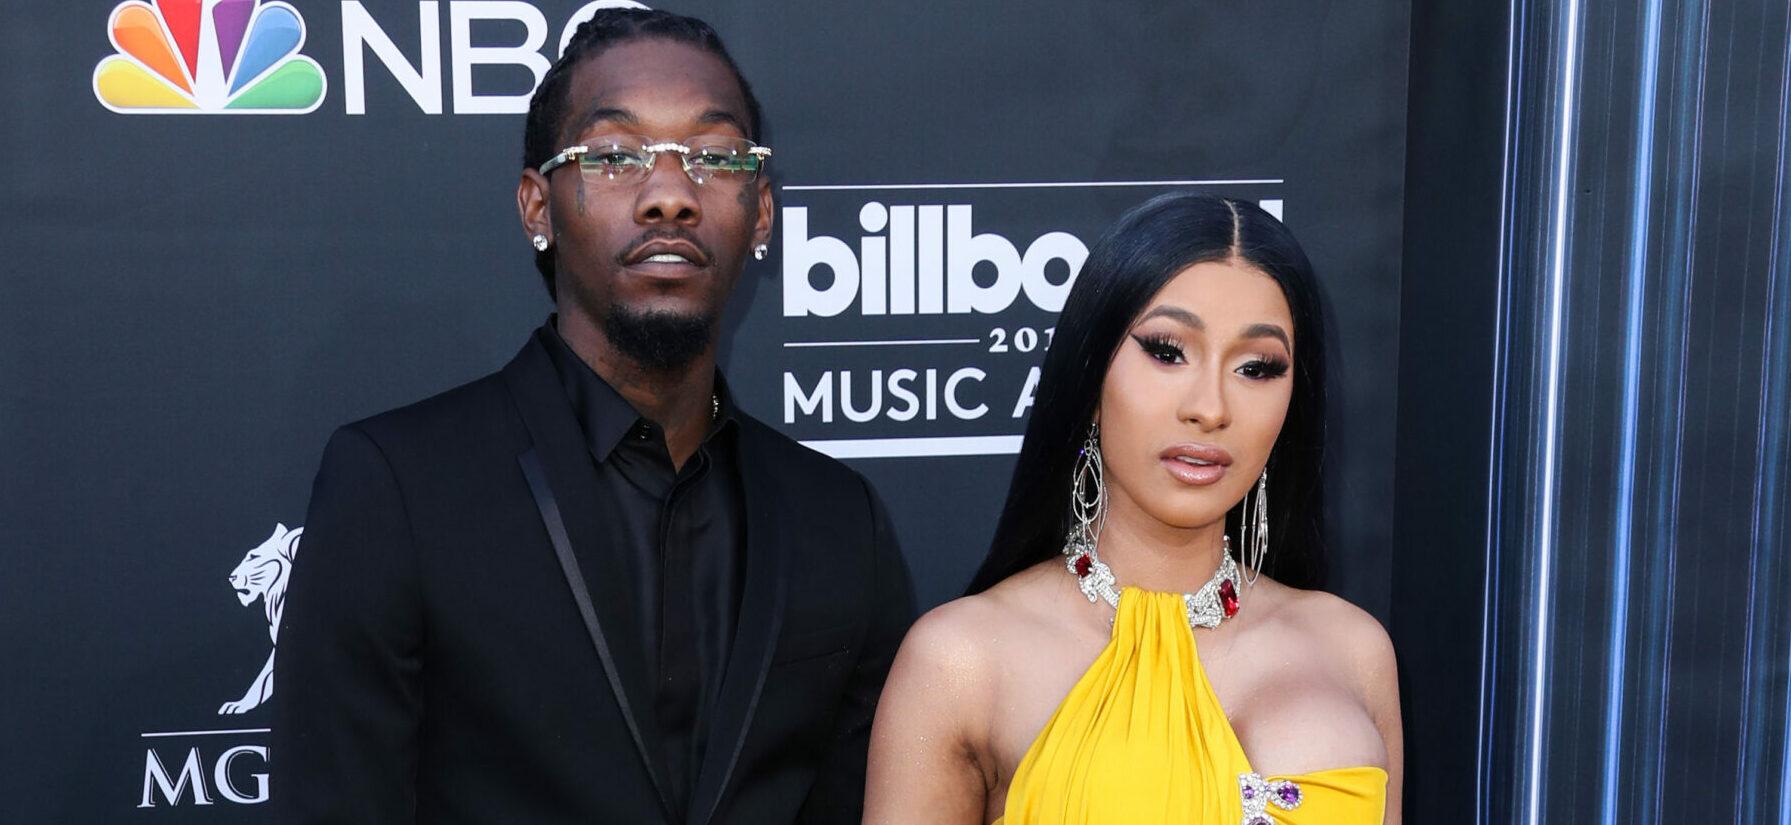 Cardi B Goes Off On Husband Offset, Says ‘Stop Calling Me!’ [VIDEO]